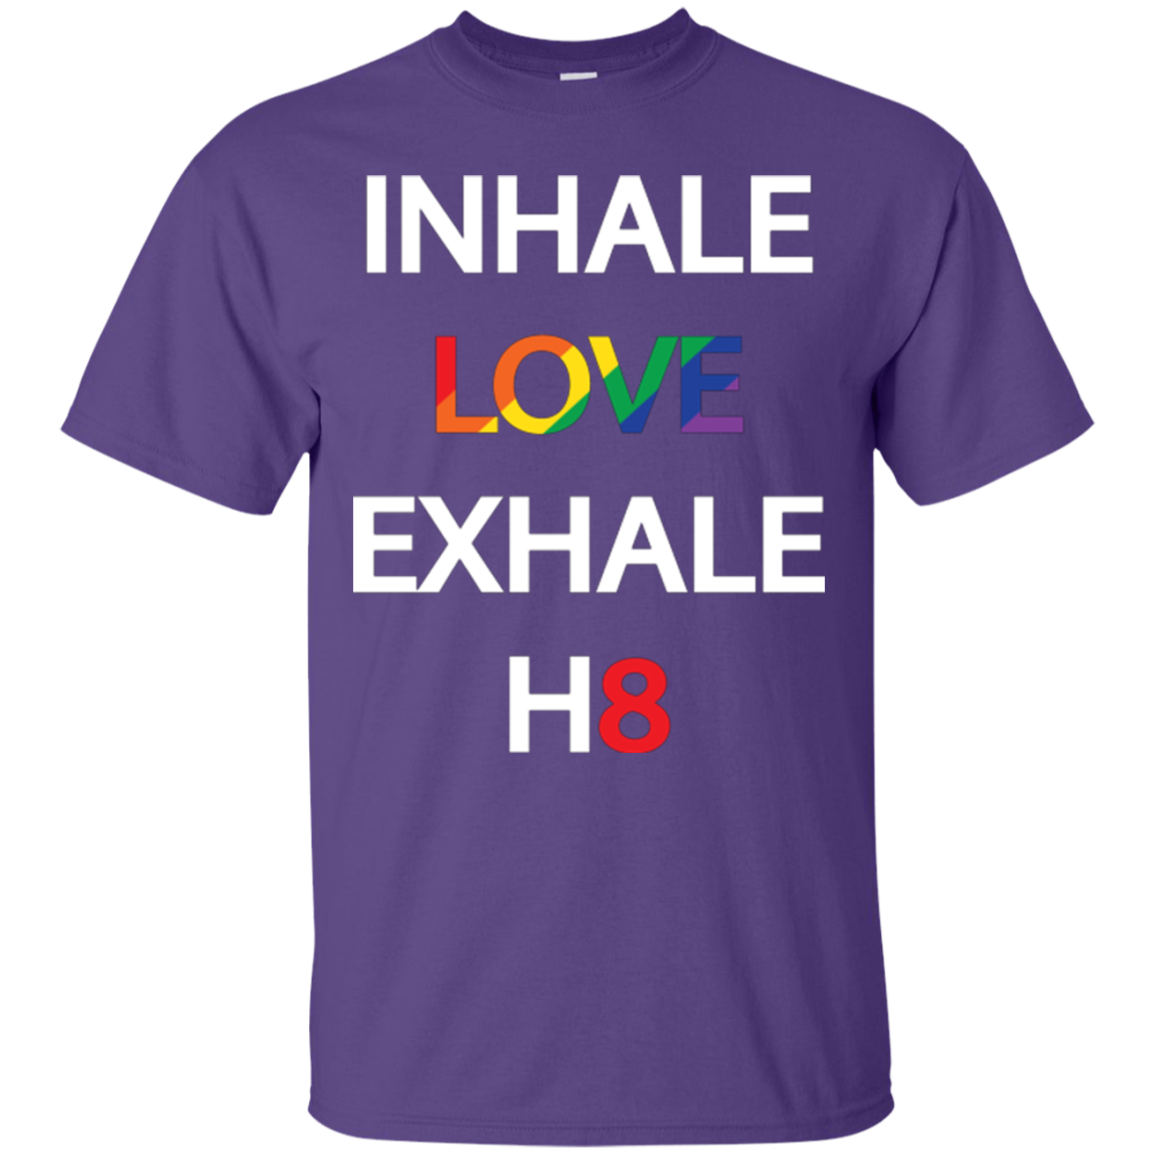 Inhale Love Exhale Hate